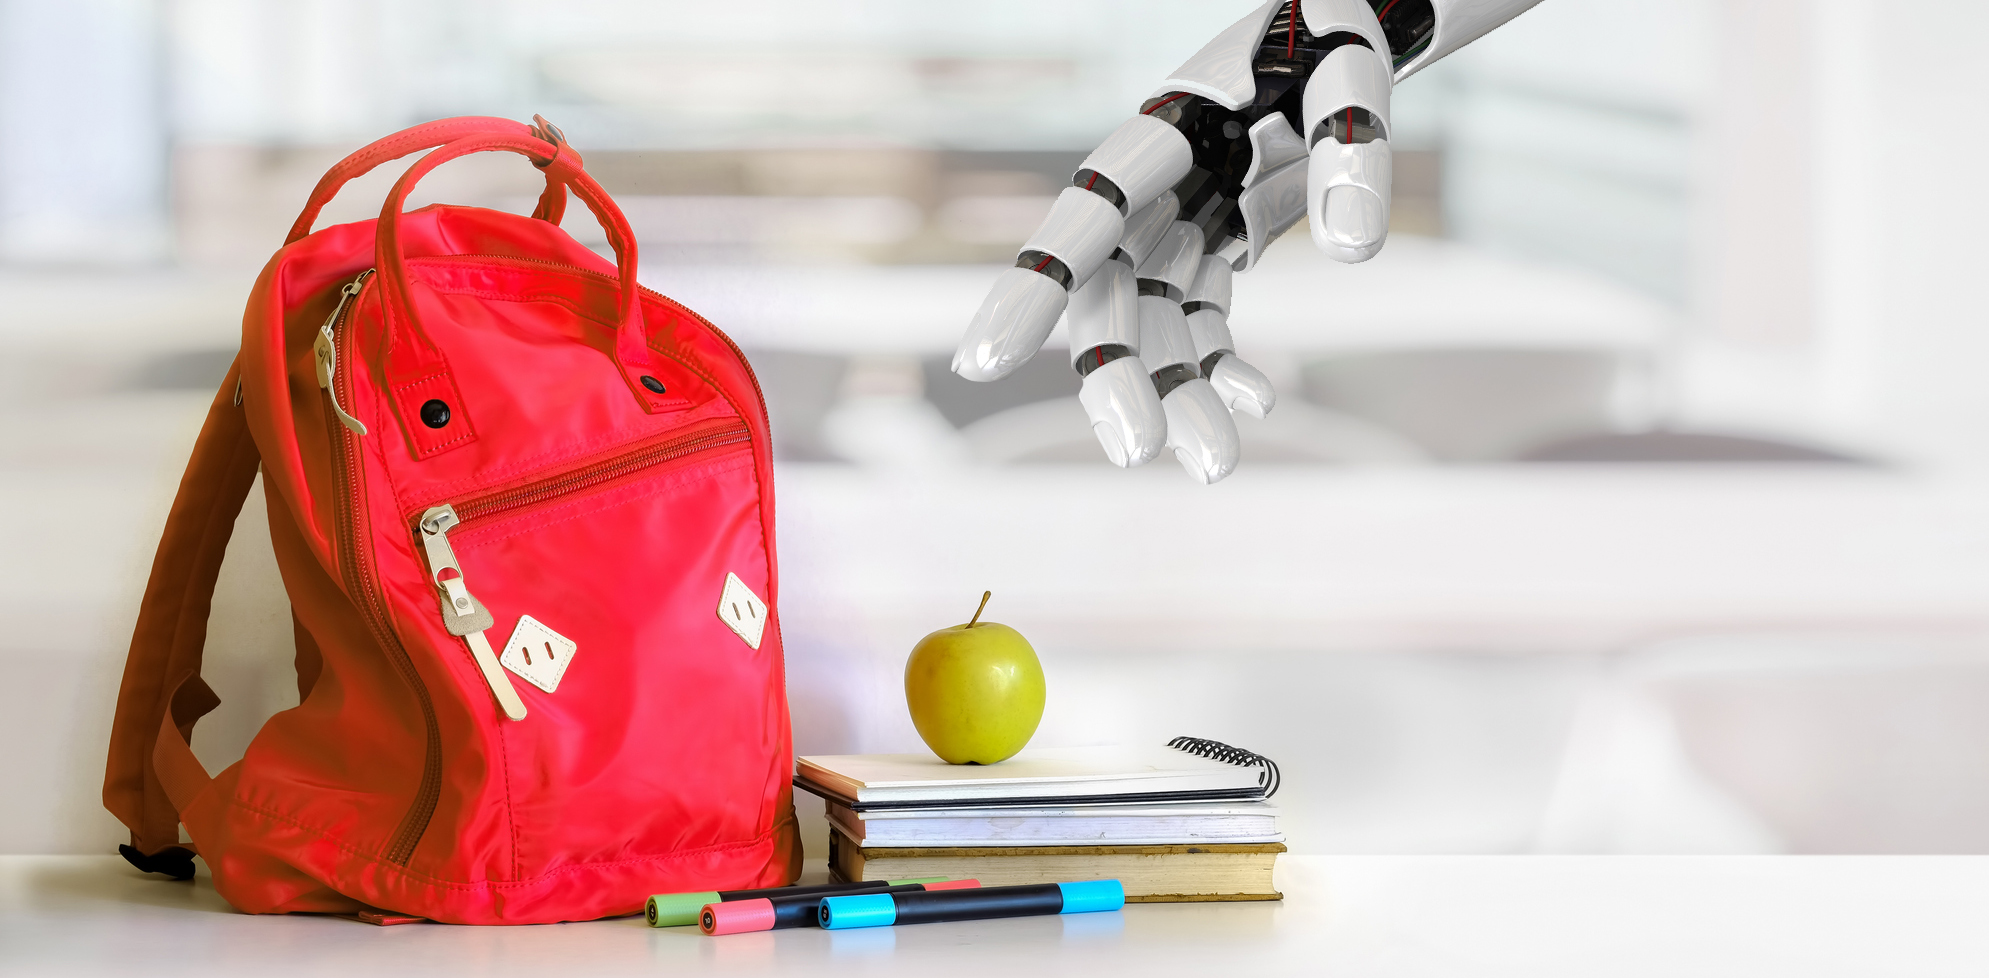 A robot reaches for a student's bag and apple